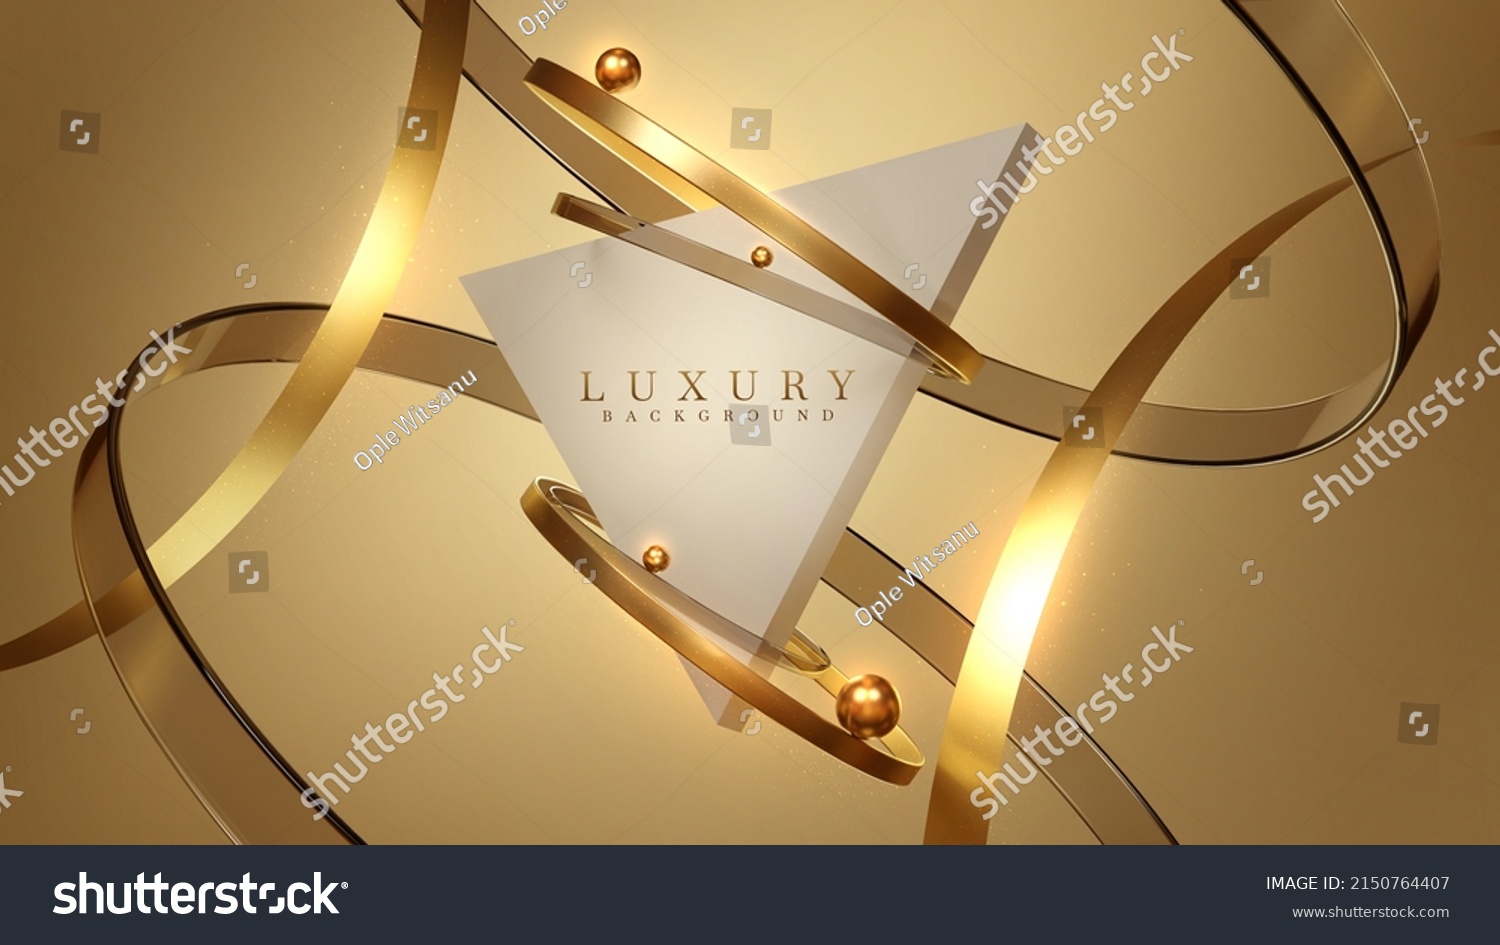 Luxury background with triangle shape frame with gold circle element and ball decoration and glitter light effect. #2150764407